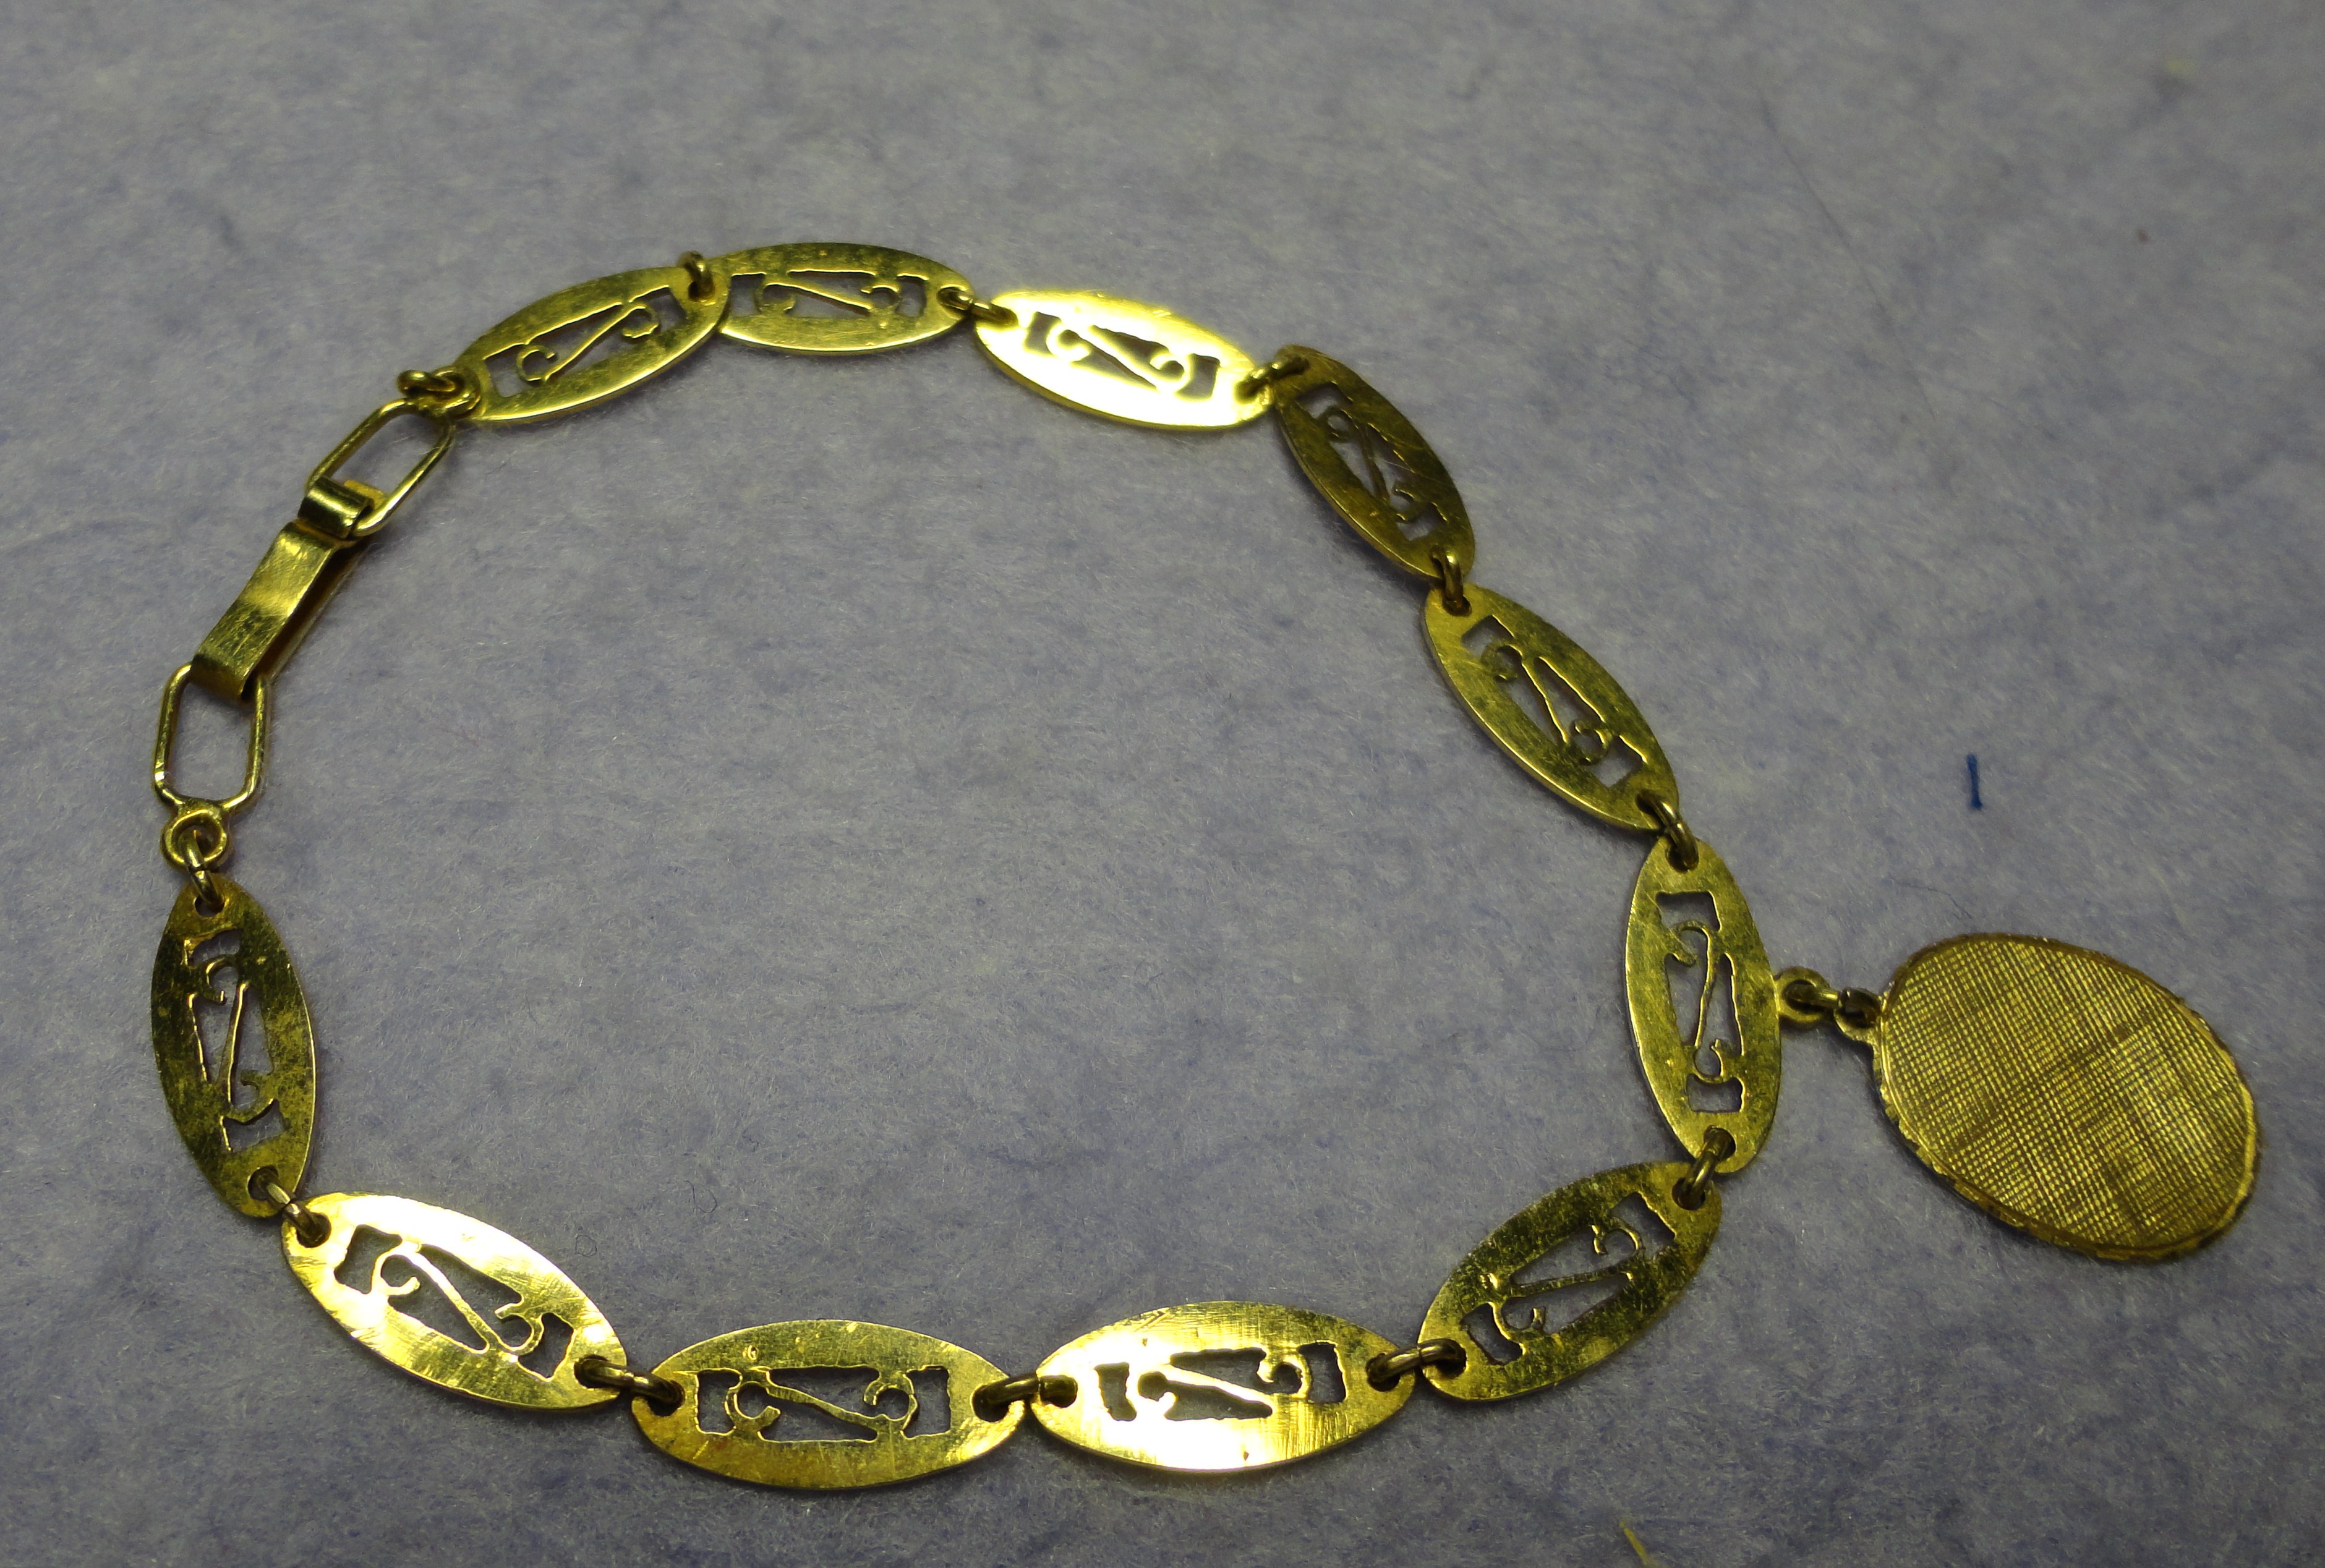 BRACELET 21KT SOLID YELLOW GOLD 5.69 MM X 7.125 INCH